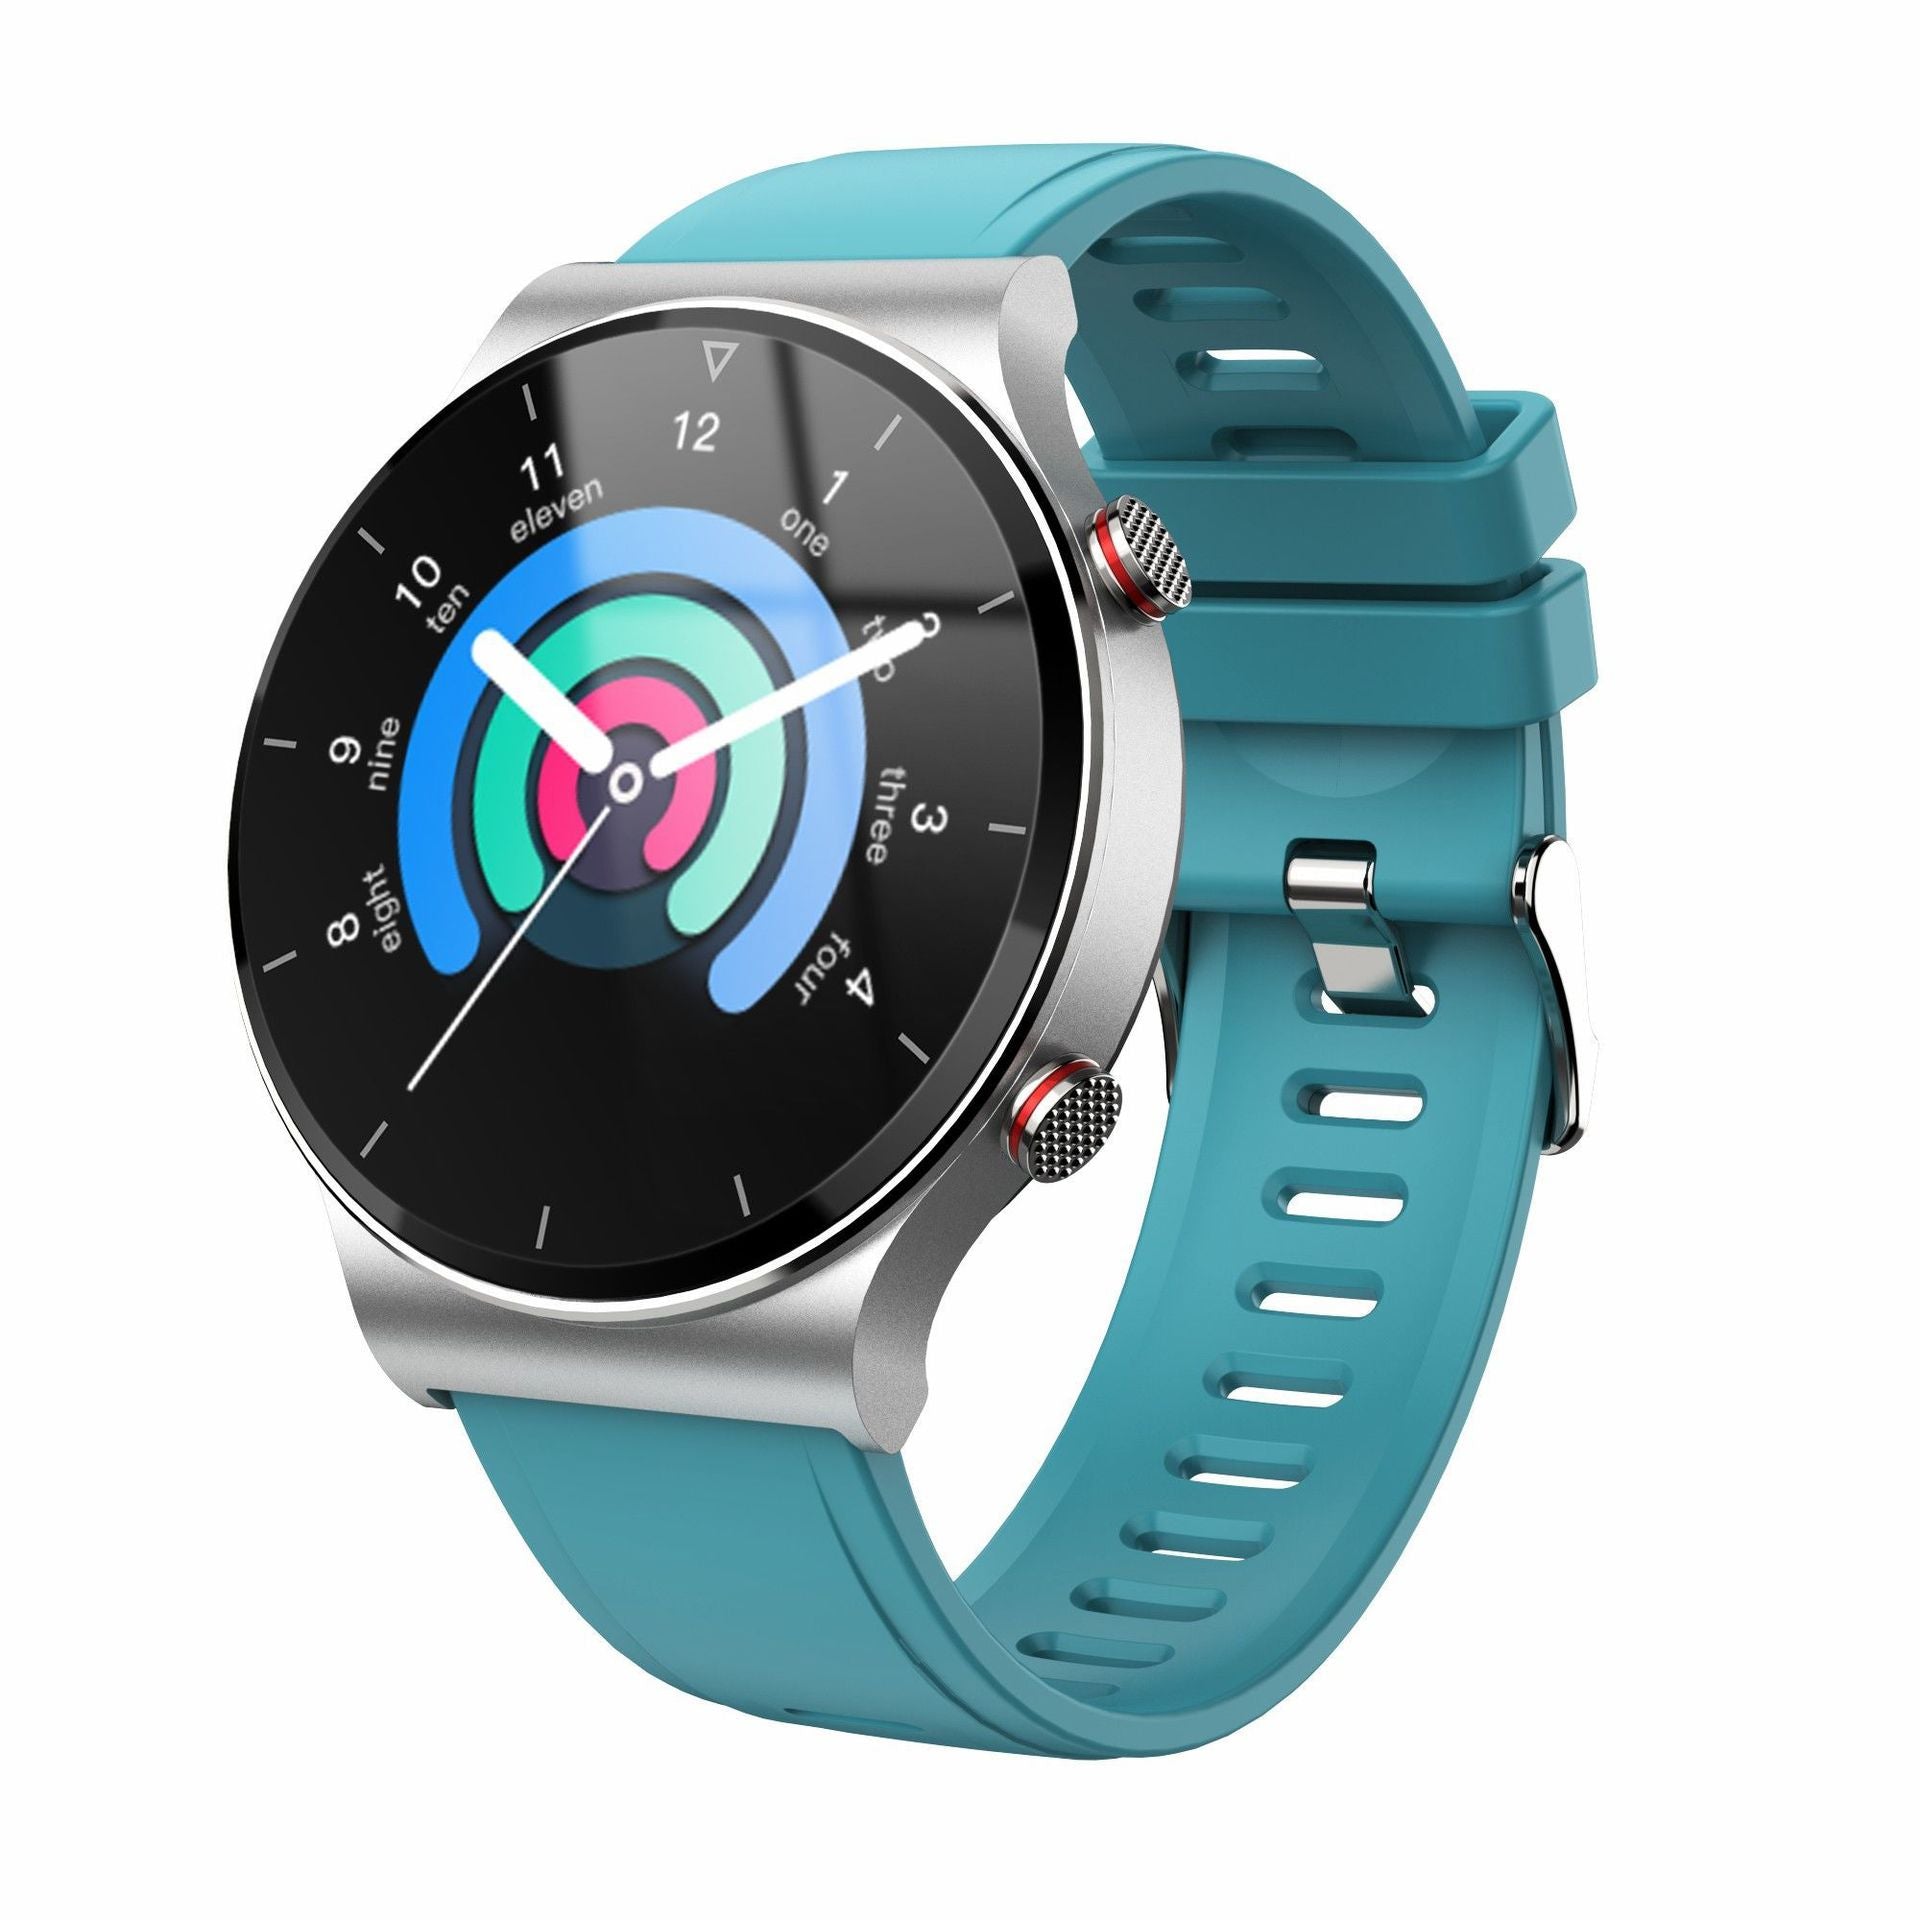 Student Multi-functional Sports Smart Watch